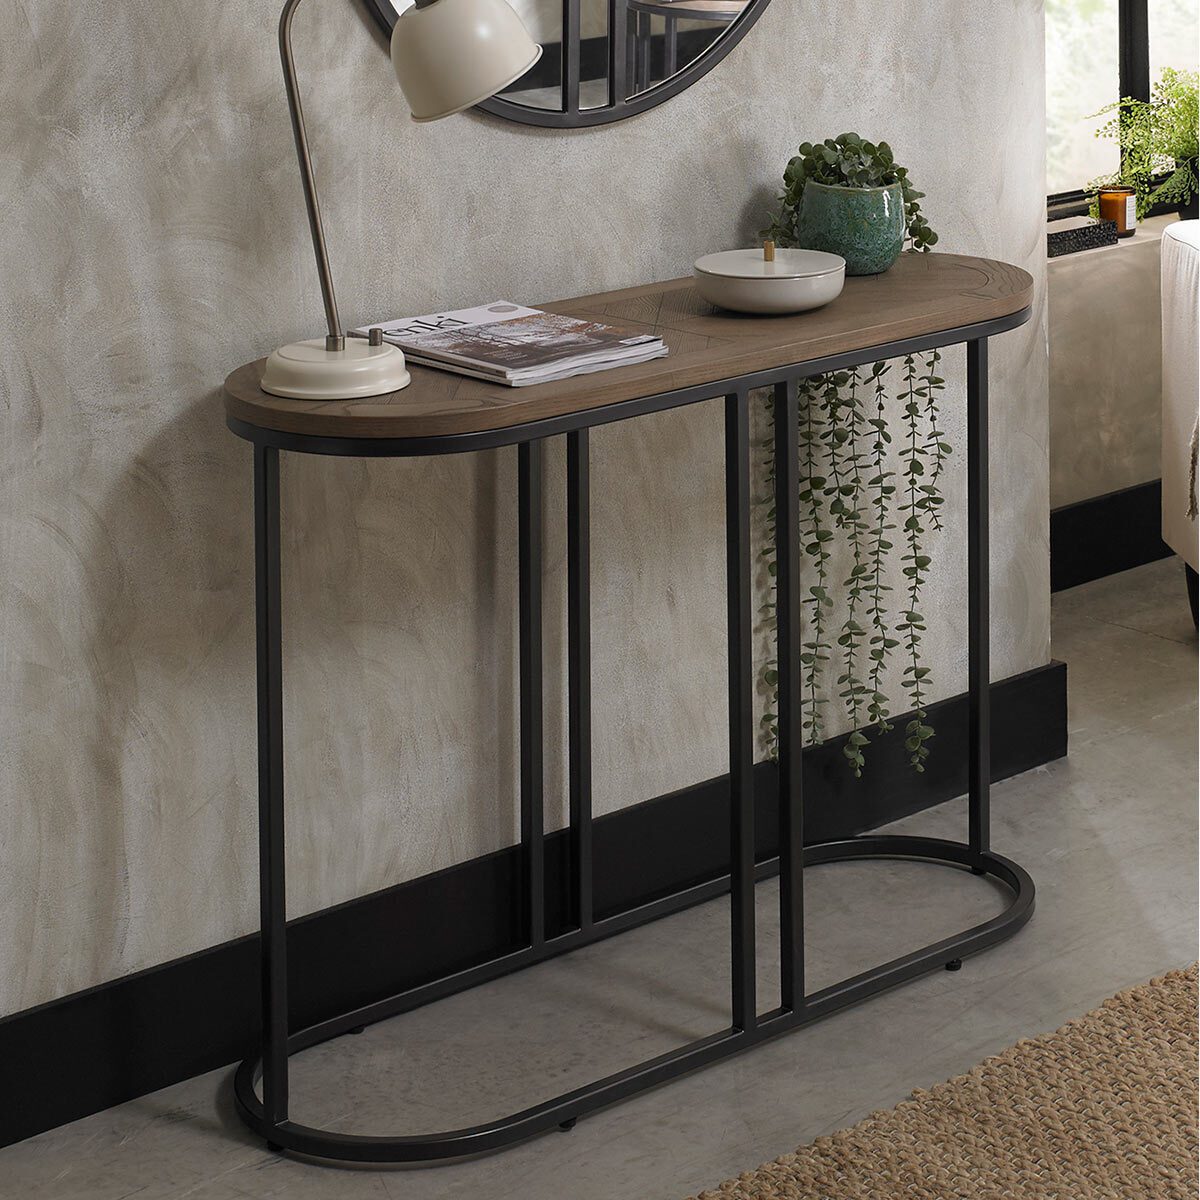 Bentley Designs Rio Weathered Ash Console Table